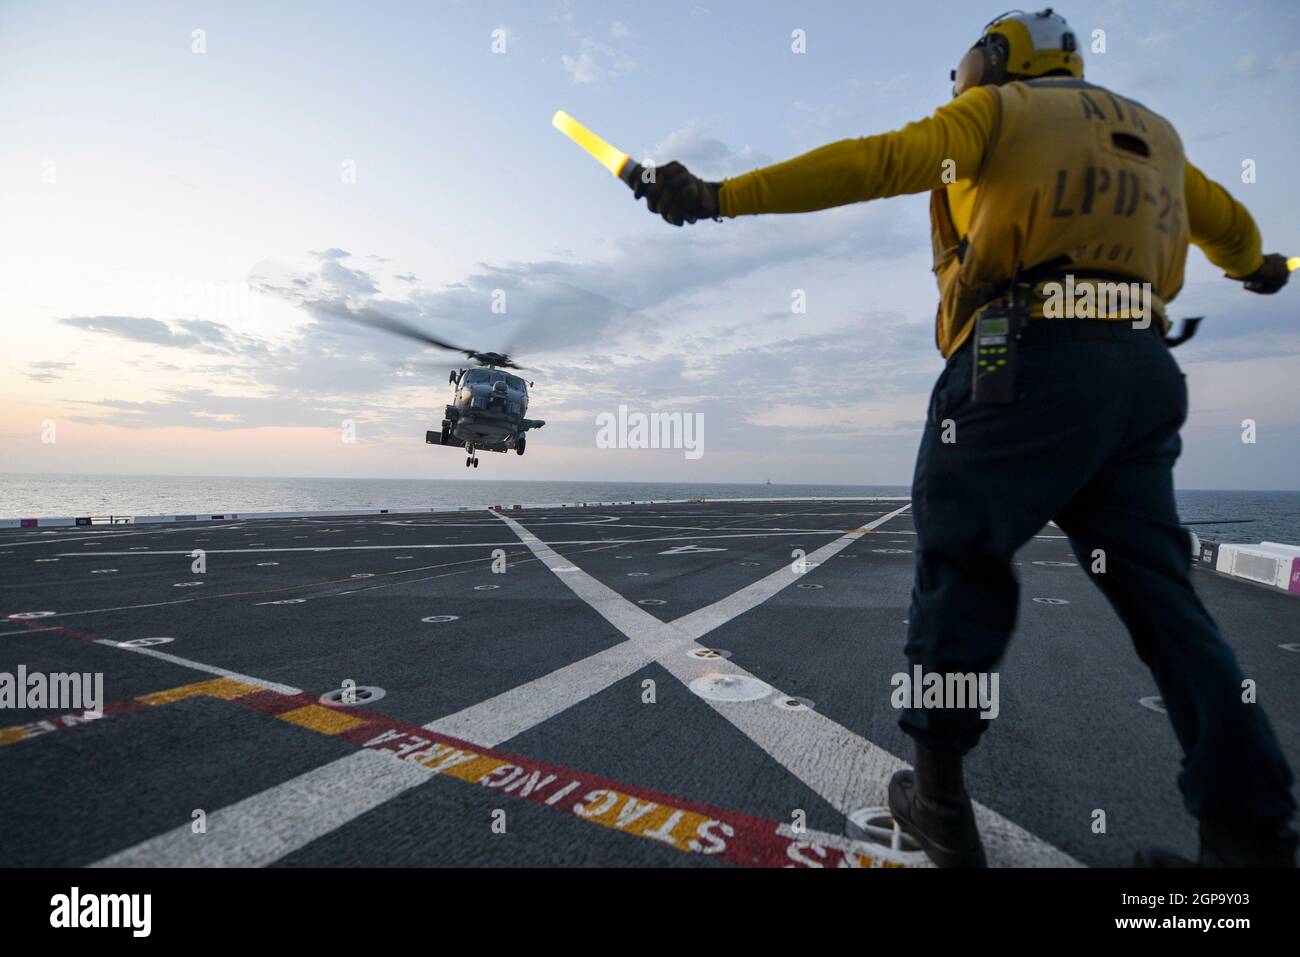 EASTERN PACIFIC OCEAN (Sept. 27, 2021) Aviation Boatswain’s Airman Kevon Lamont-Anderson, from Cleburn, Texas, assigned to amphibious transport dock ship USS John P. Murtha (LPD 26) directs a MH-60R Sea Hawk helicopter attached to the “Scorpions” of Helicopter Maritime Strike Squadron (HSM) 49 to land on the flight deck during UNITAS LXII, Sept. 27, 2021.  UNITAS is the world’s longest-running maritime exercise. Hosted this year by Peru, it brings together multinational forces from 20 countries and includes 32 ships, four submarines, and 26 aircraft conducting operations off the coast of Lima Stock Photo